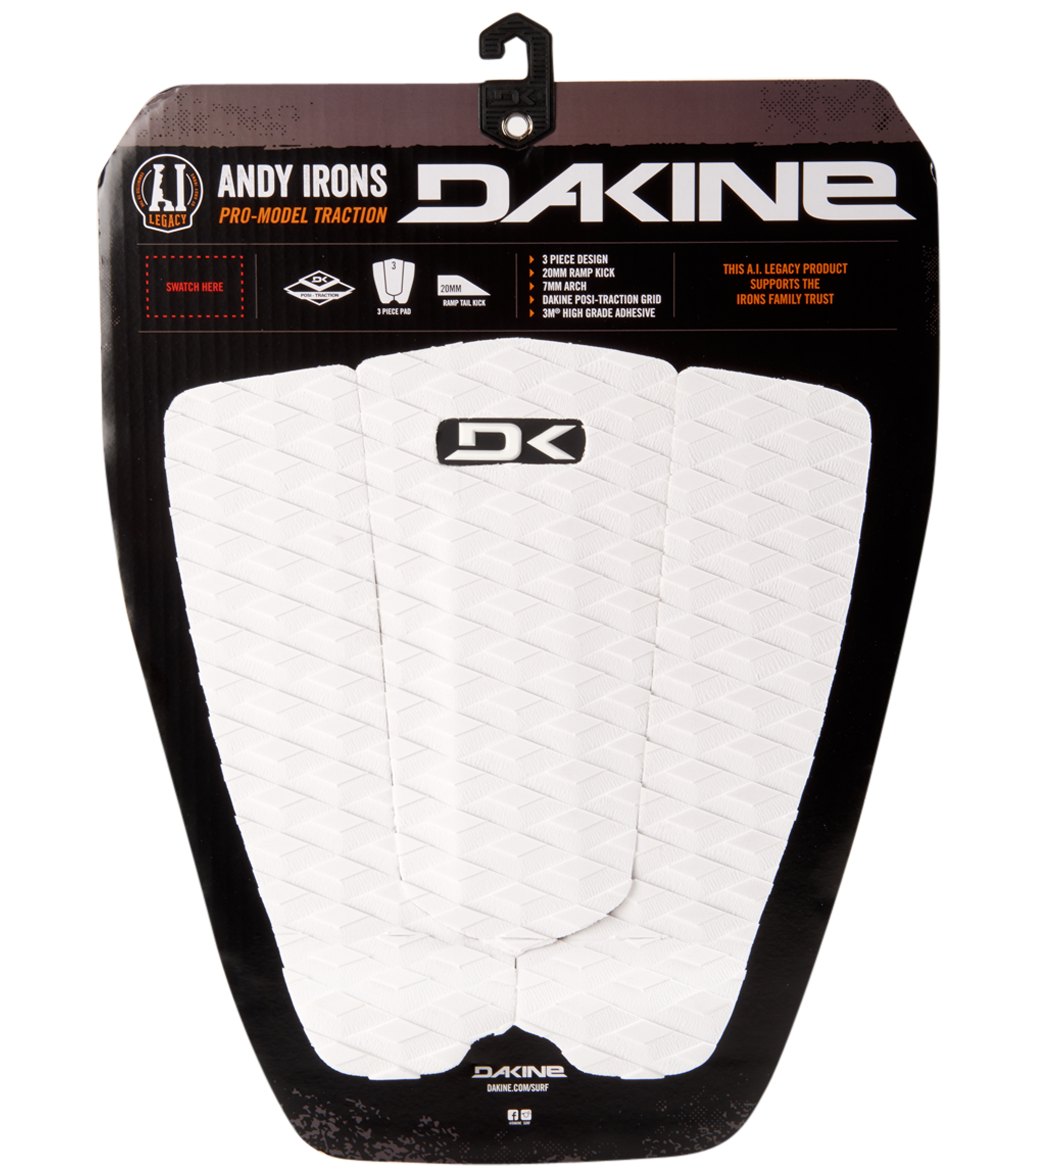 Dakine Andy Irons Pro Traction Pad at SwimOutlet.com